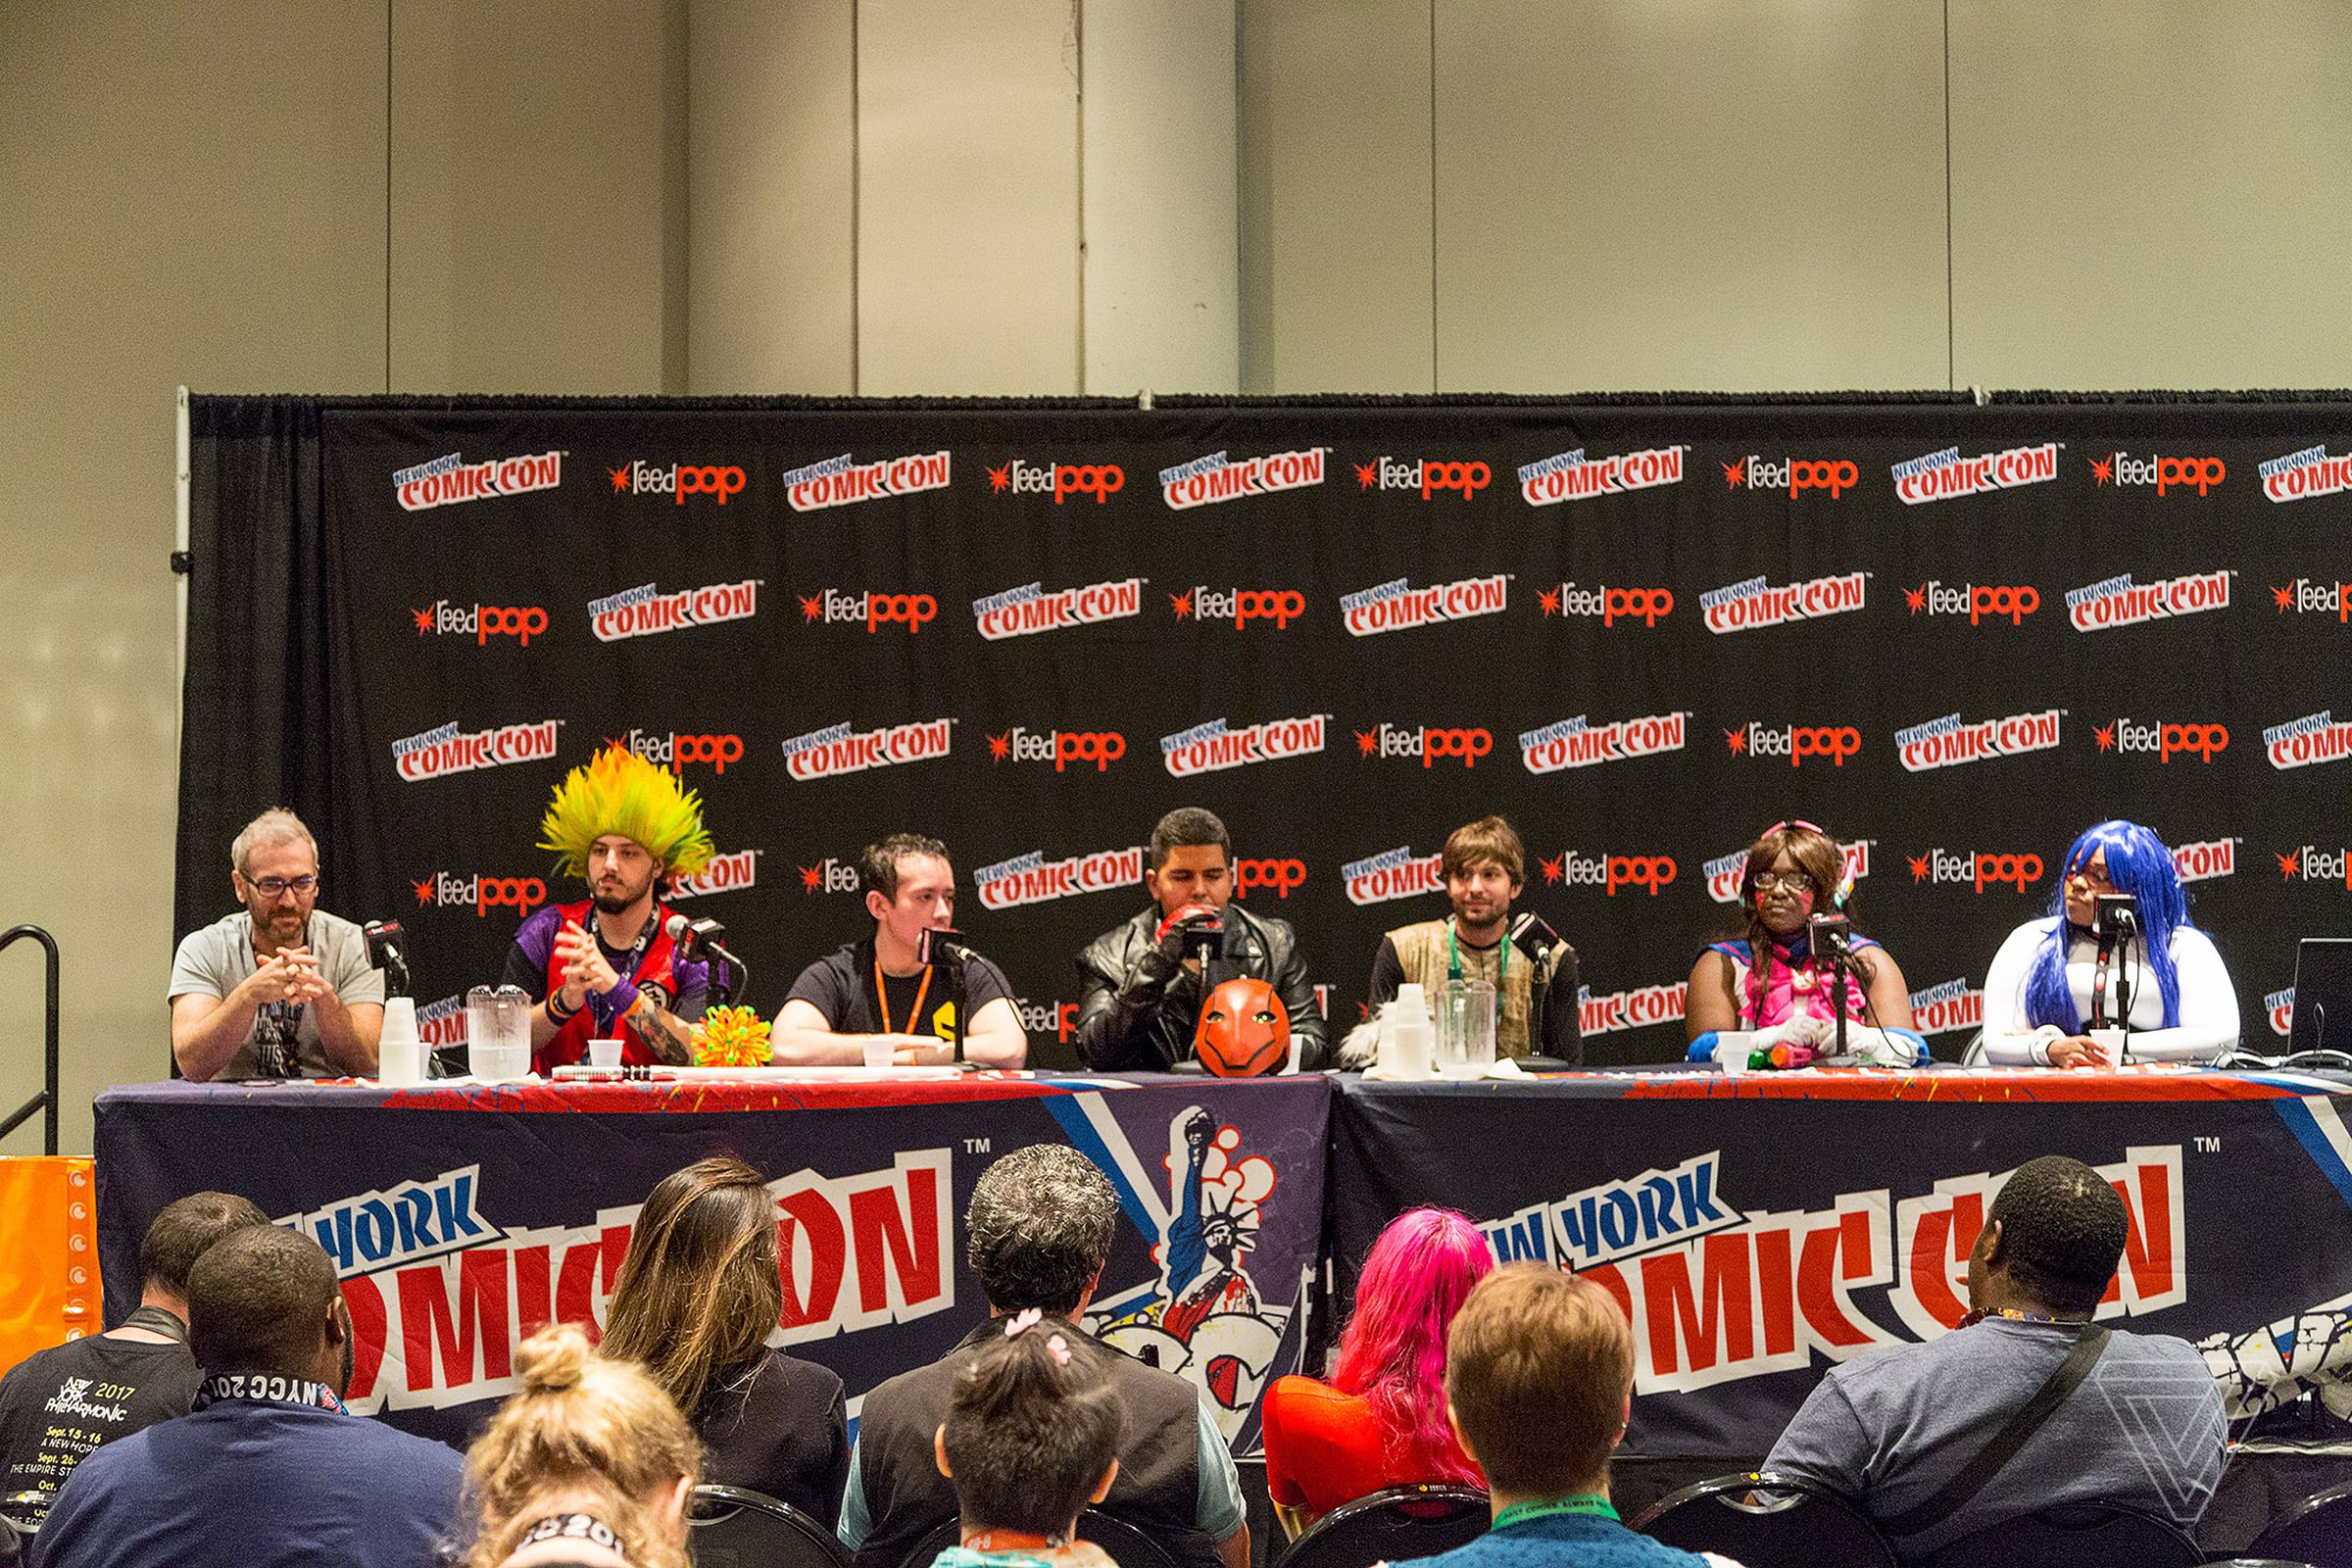 The panel on Cosplaying and Disabilities. From the left: David Vogel, Dylan Cohen, Nathan Gonzales, Justin Santiago, Joseph Munisteri, Startdust Megu, and Harujuku Chic.